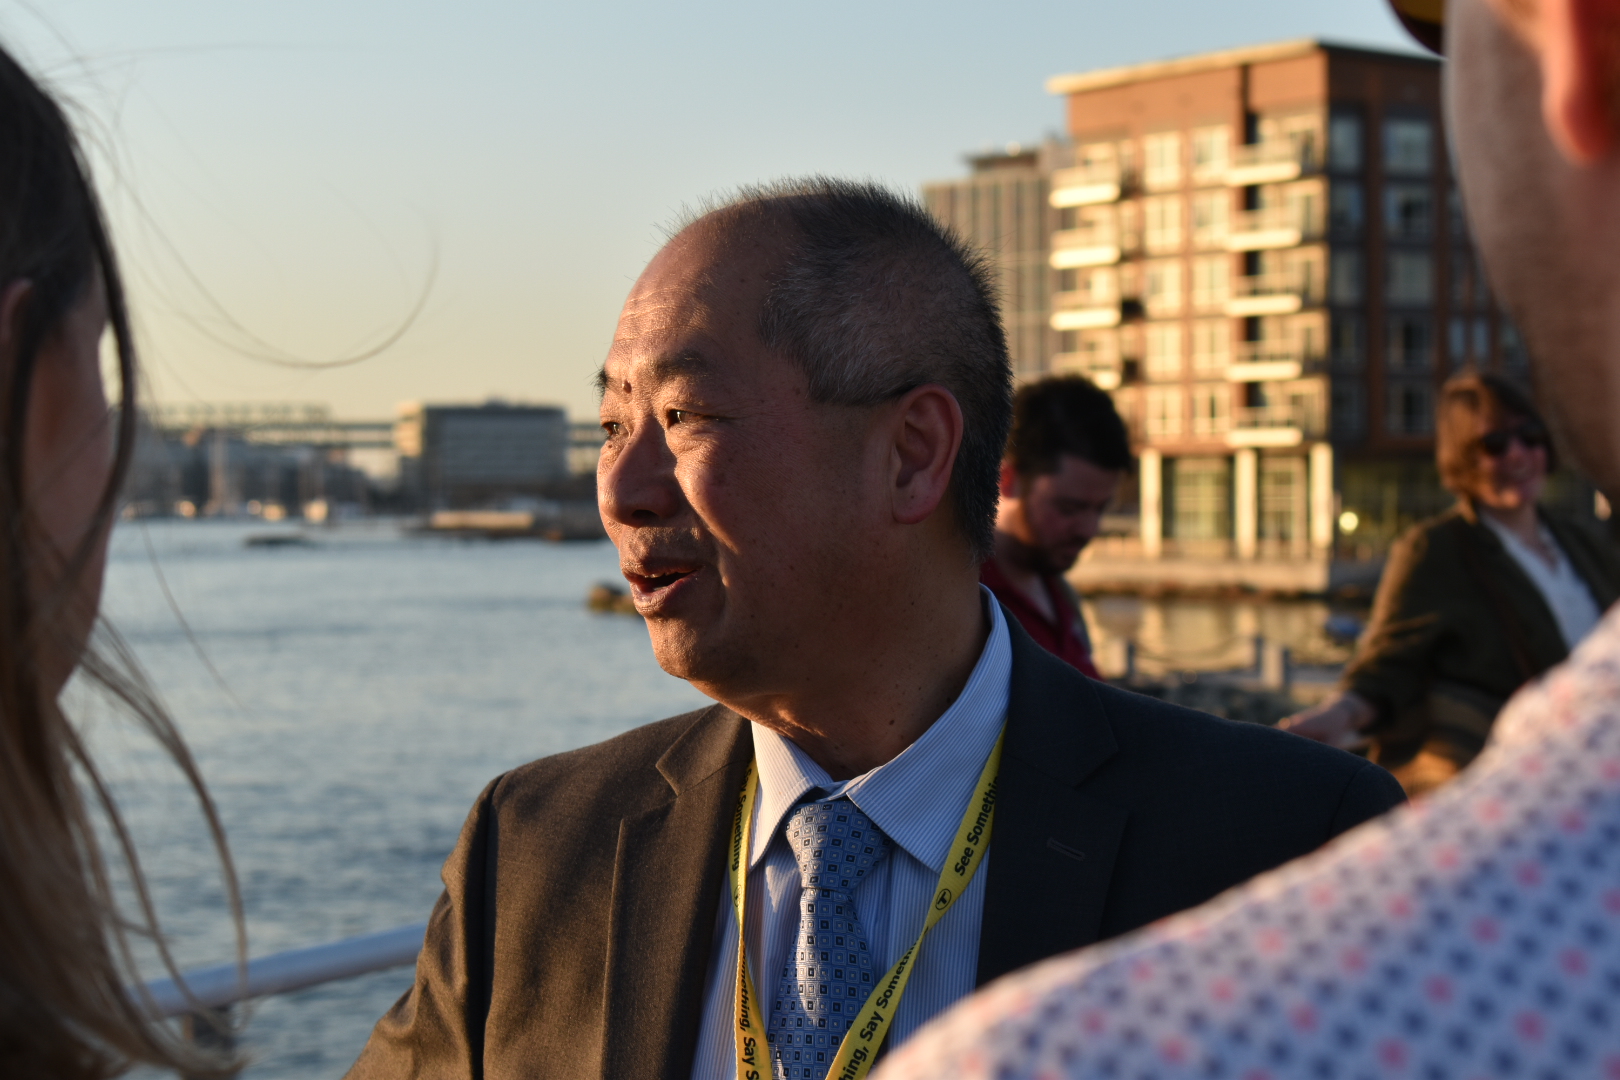 A middle-aged Asian man in a suit and tie looks into the setting sun with the Boston Harbor behind him.